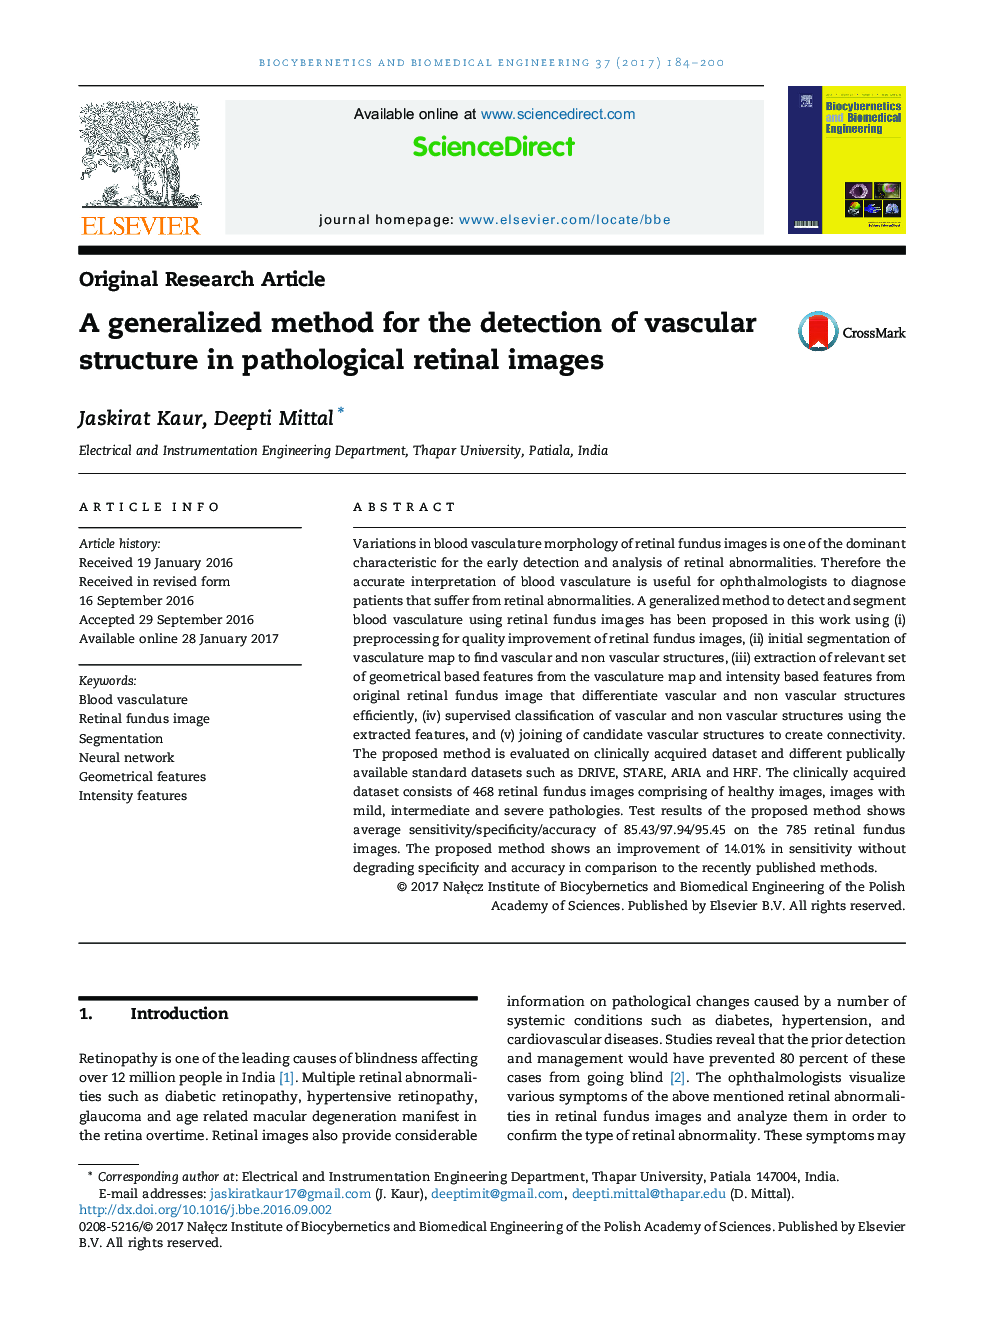 A generalized method for the detection of vascular structure in pathological retinal images